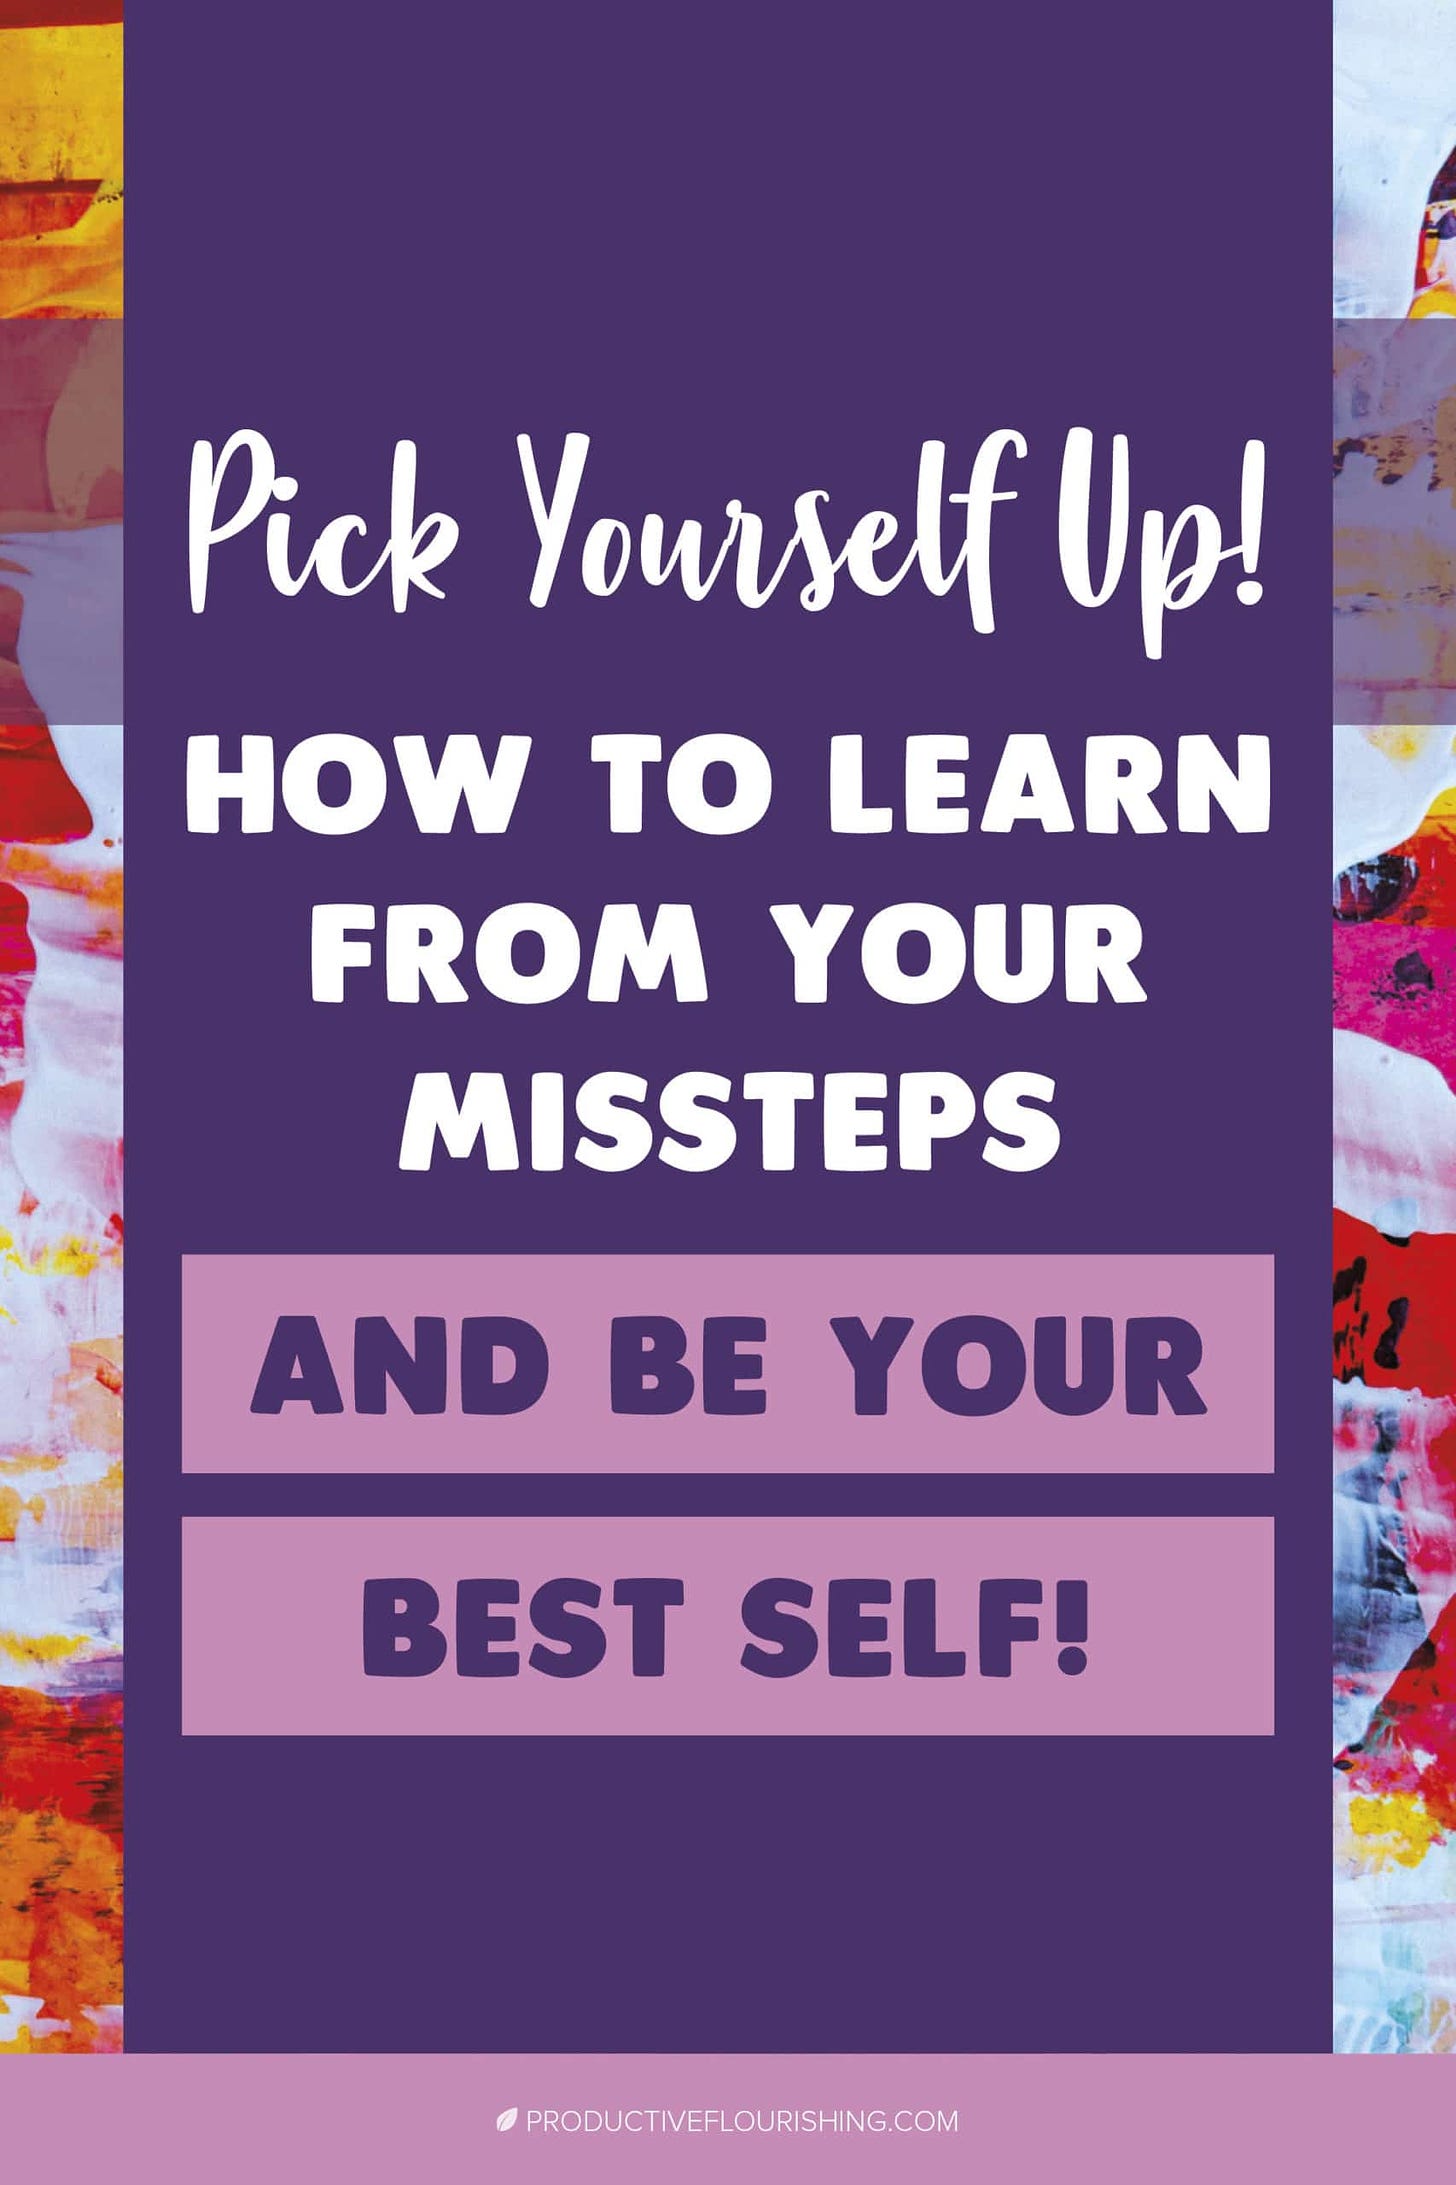 Learn how to be your best self by bouncing back from mistakes and failures. Turn those experiences into learning moments! Make the most from your not-so-great experiences by taking the valuable lessons learned. #selfcaretips #productiveflourishing